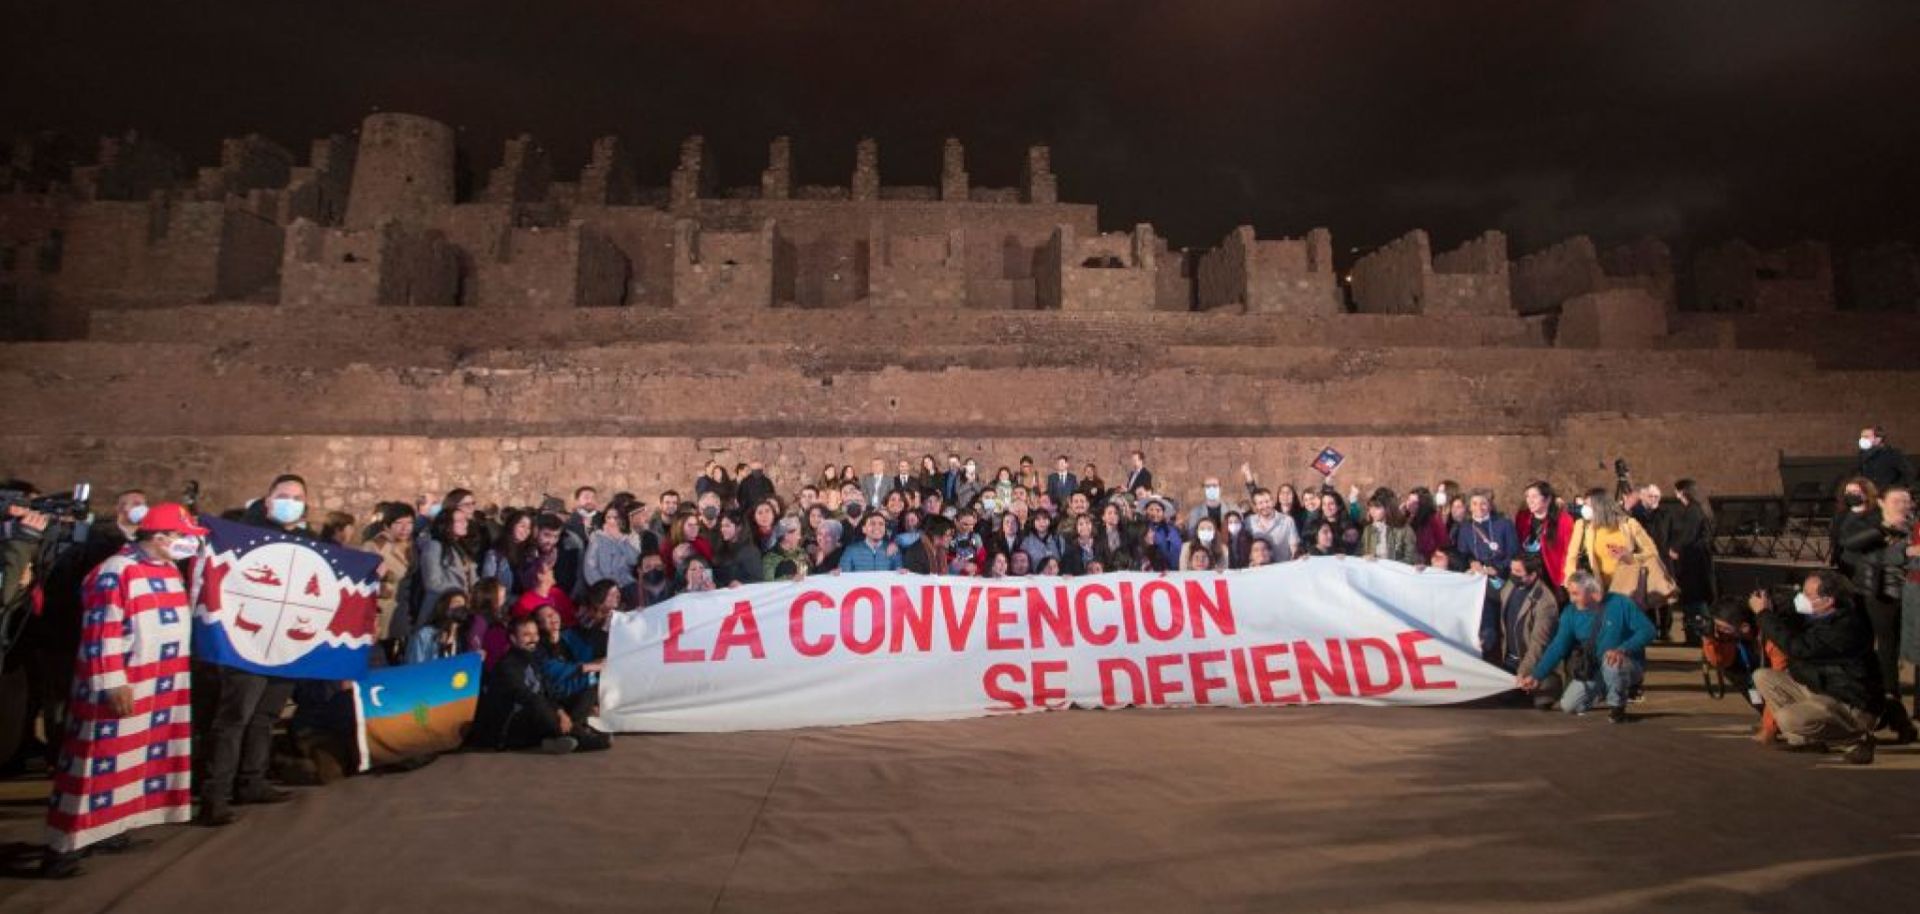 Members of the Constitutional Convention pose for a picture during the official presentation of the draft they made of the new constitution on May 16, 2022, at the Ruinas de Huanchaca National Monument in Antofagasta, Chile.